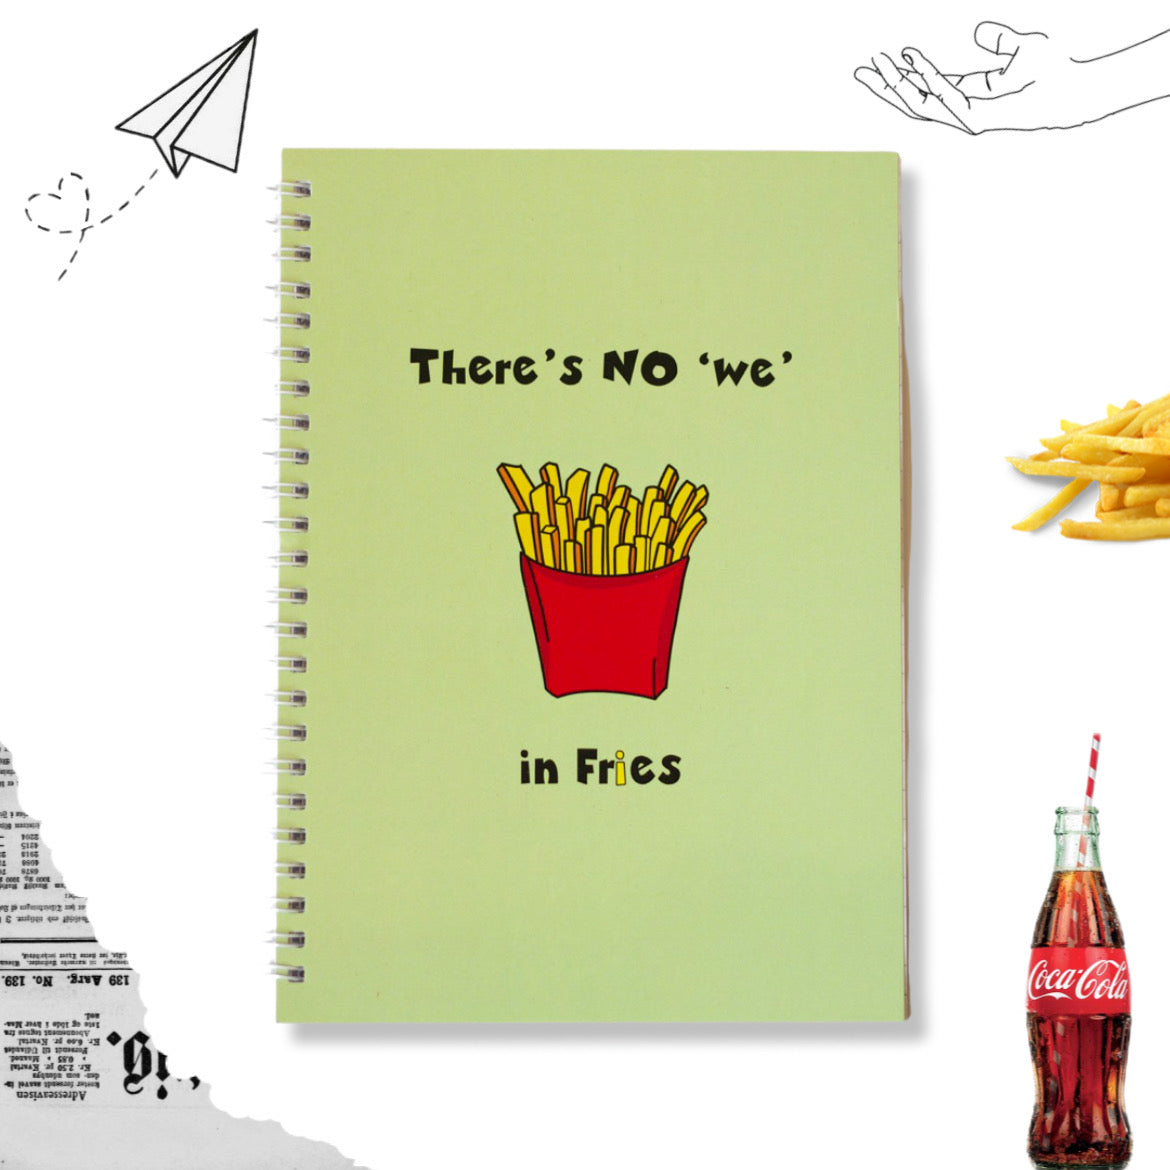 There’s NO ‘we’ in Fries